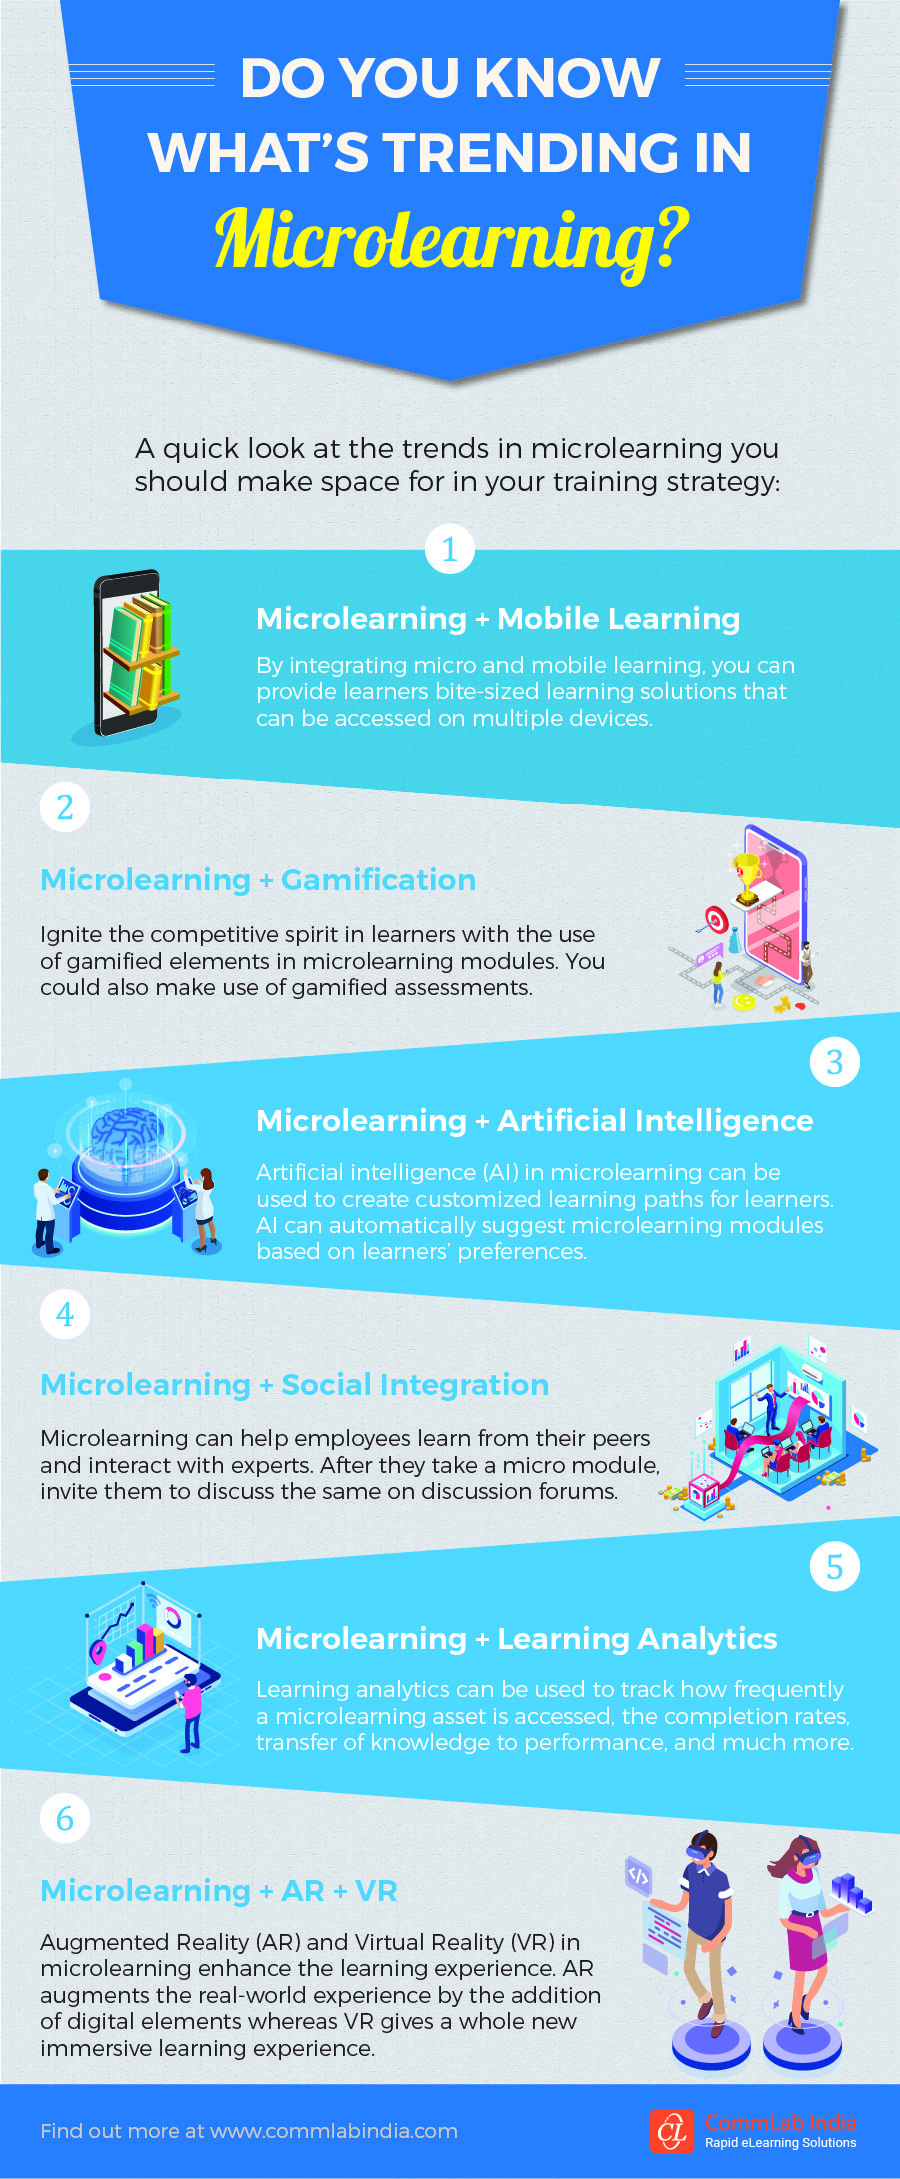 Do You Know What’s Trending In Microlearning?